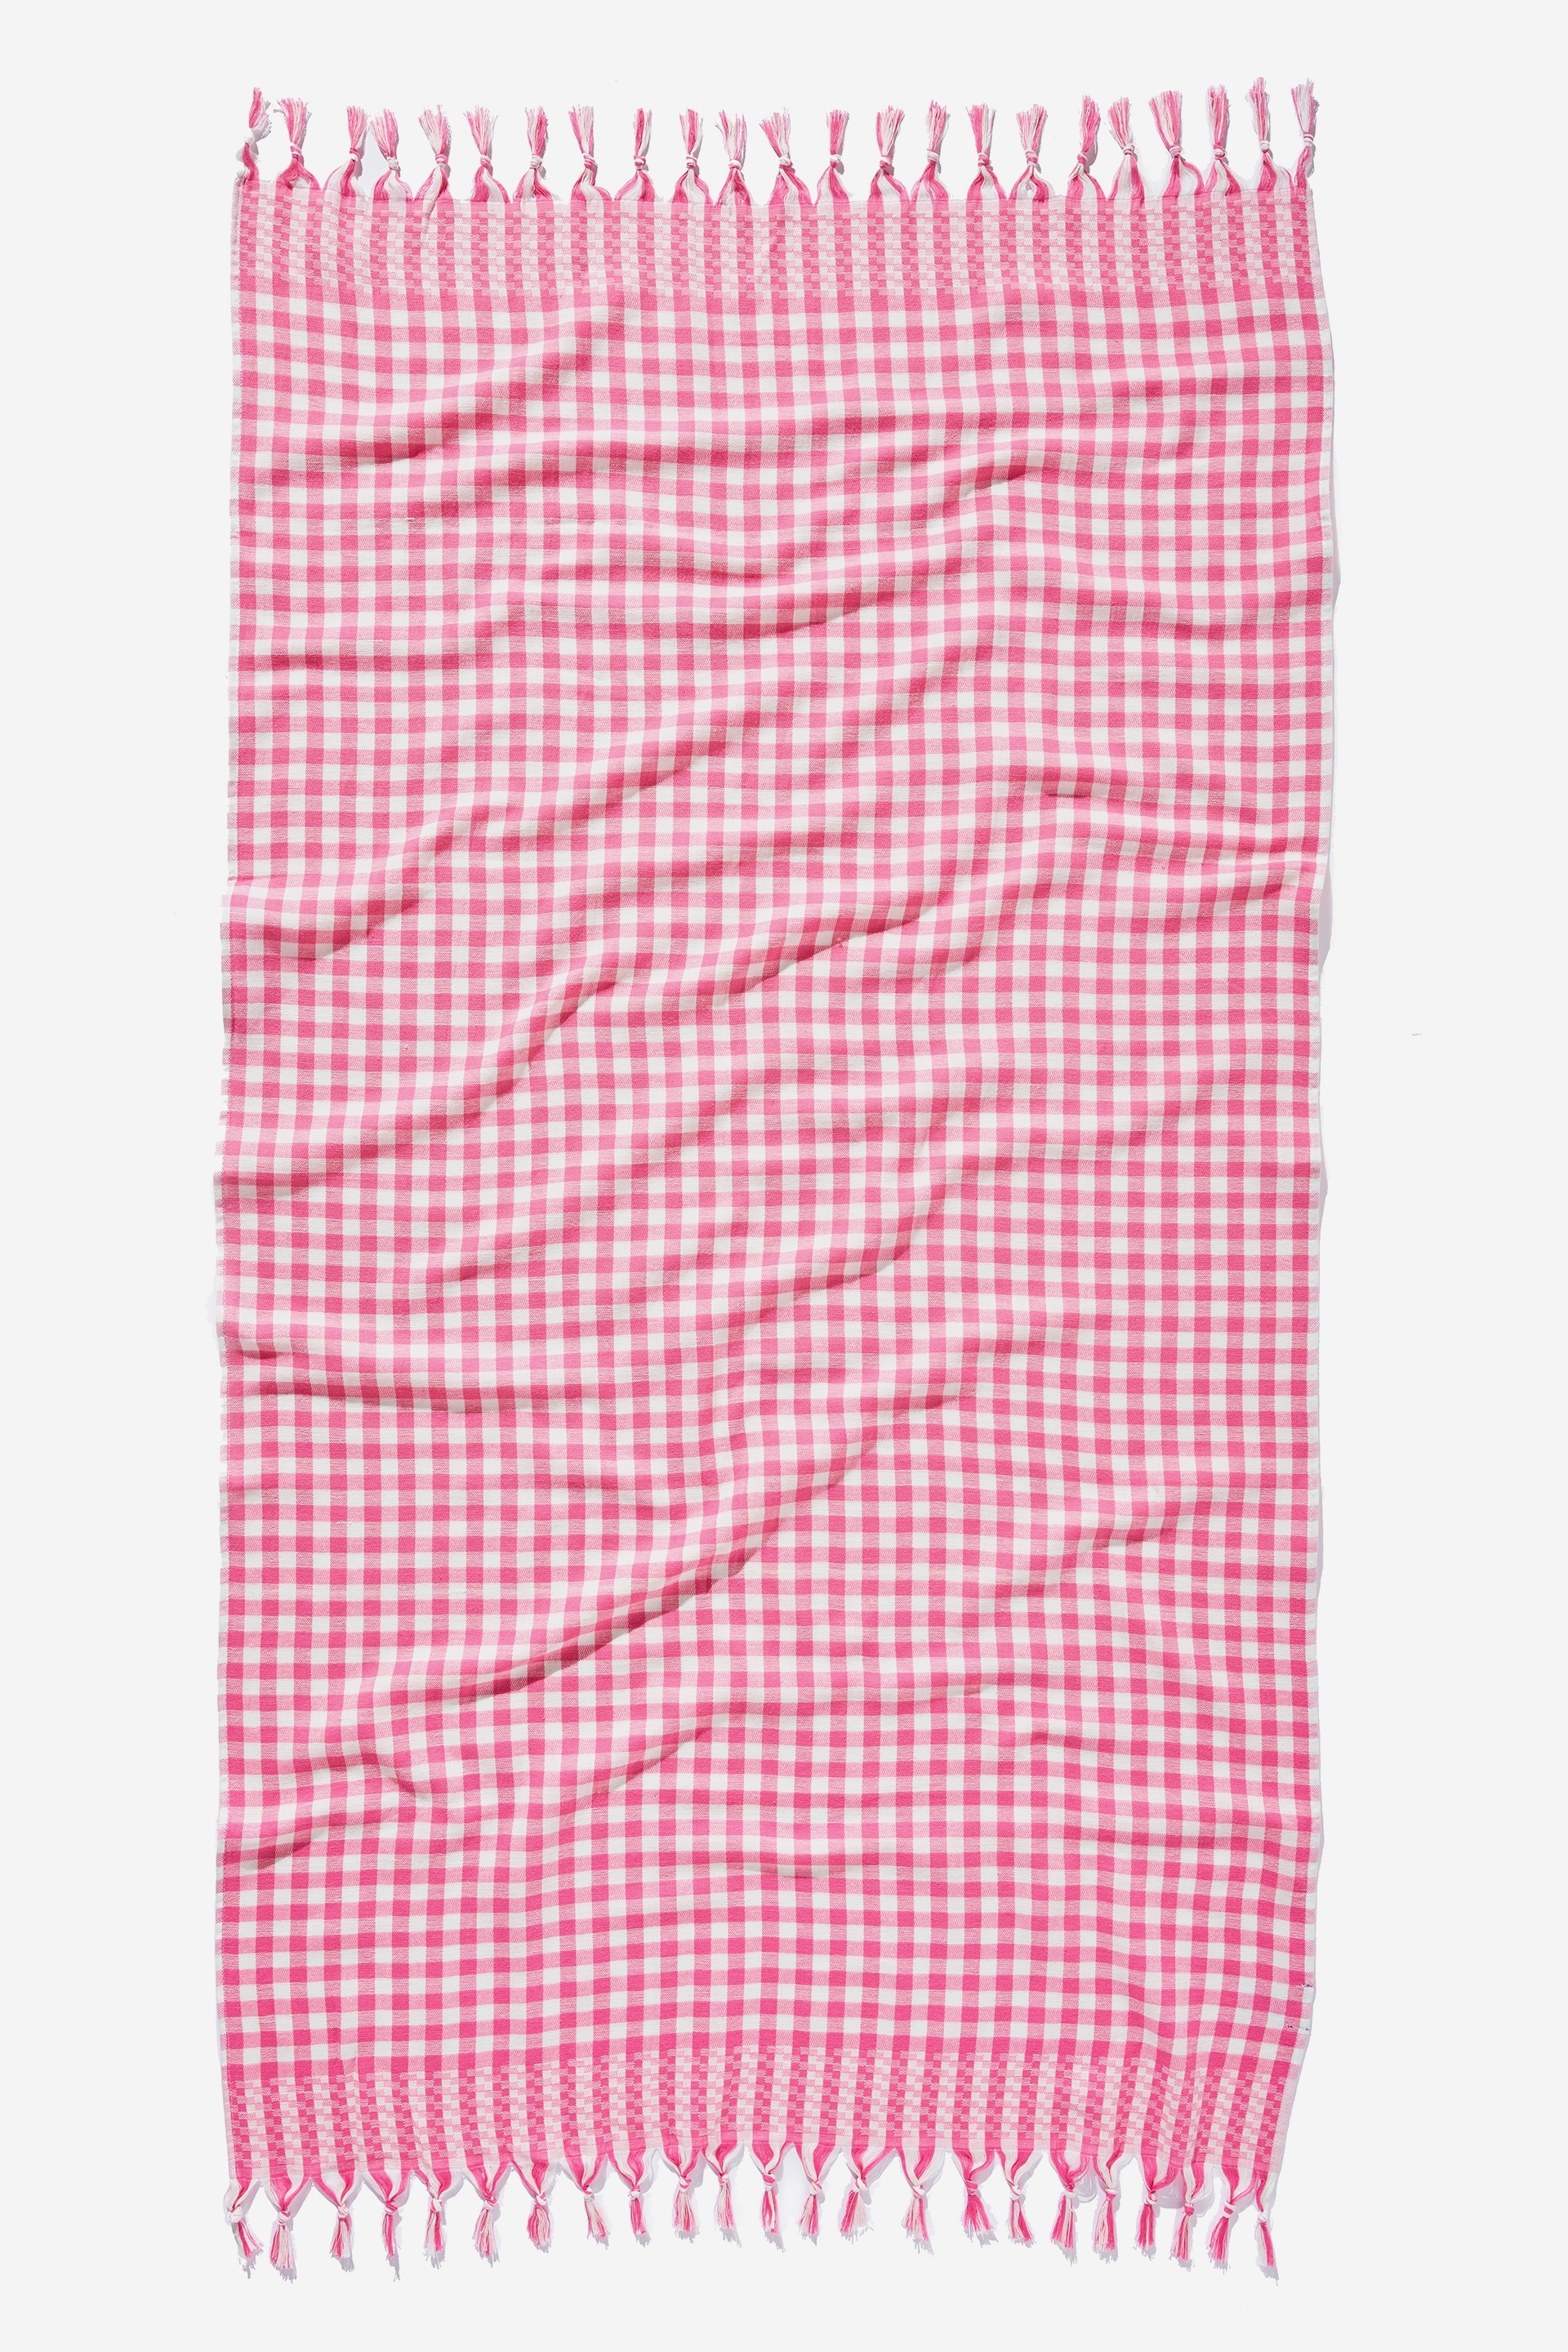 Rubi - Whitehaven Lightweight Towel - Pink milly micro gingham